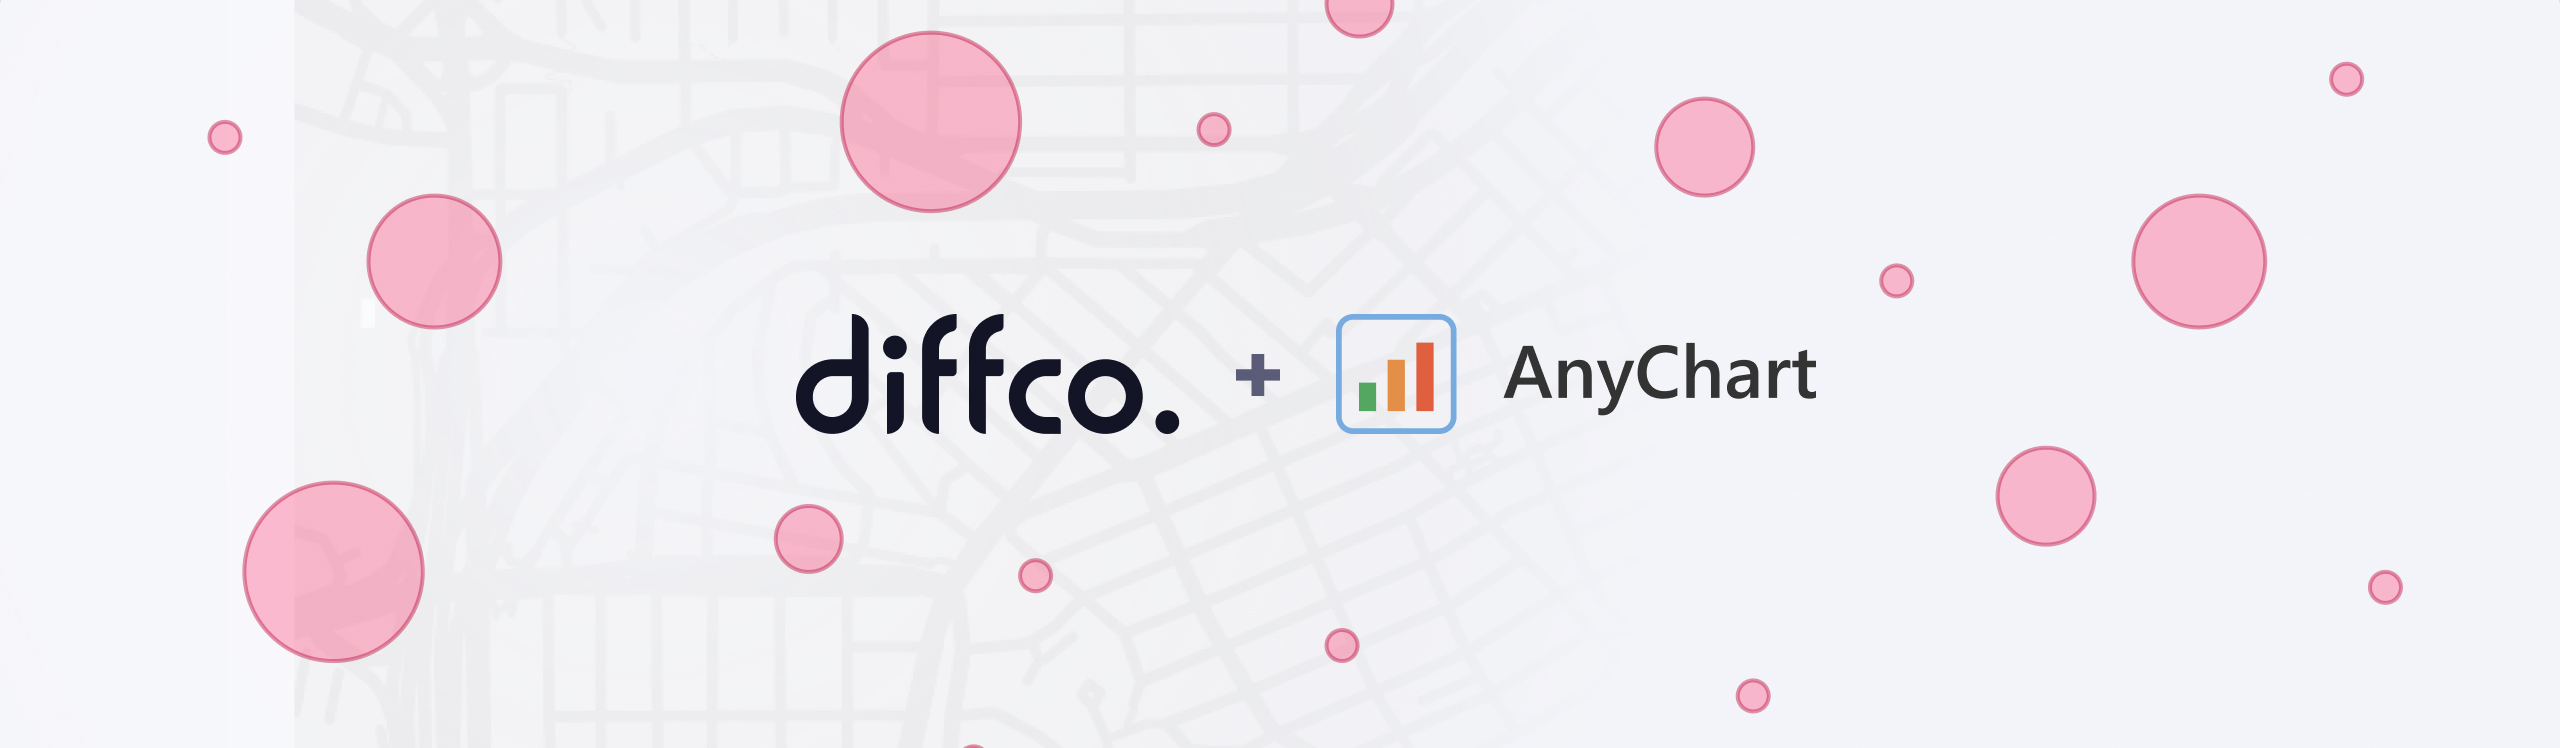 Diffco partners with AnyChart to make StopCorona even more visual